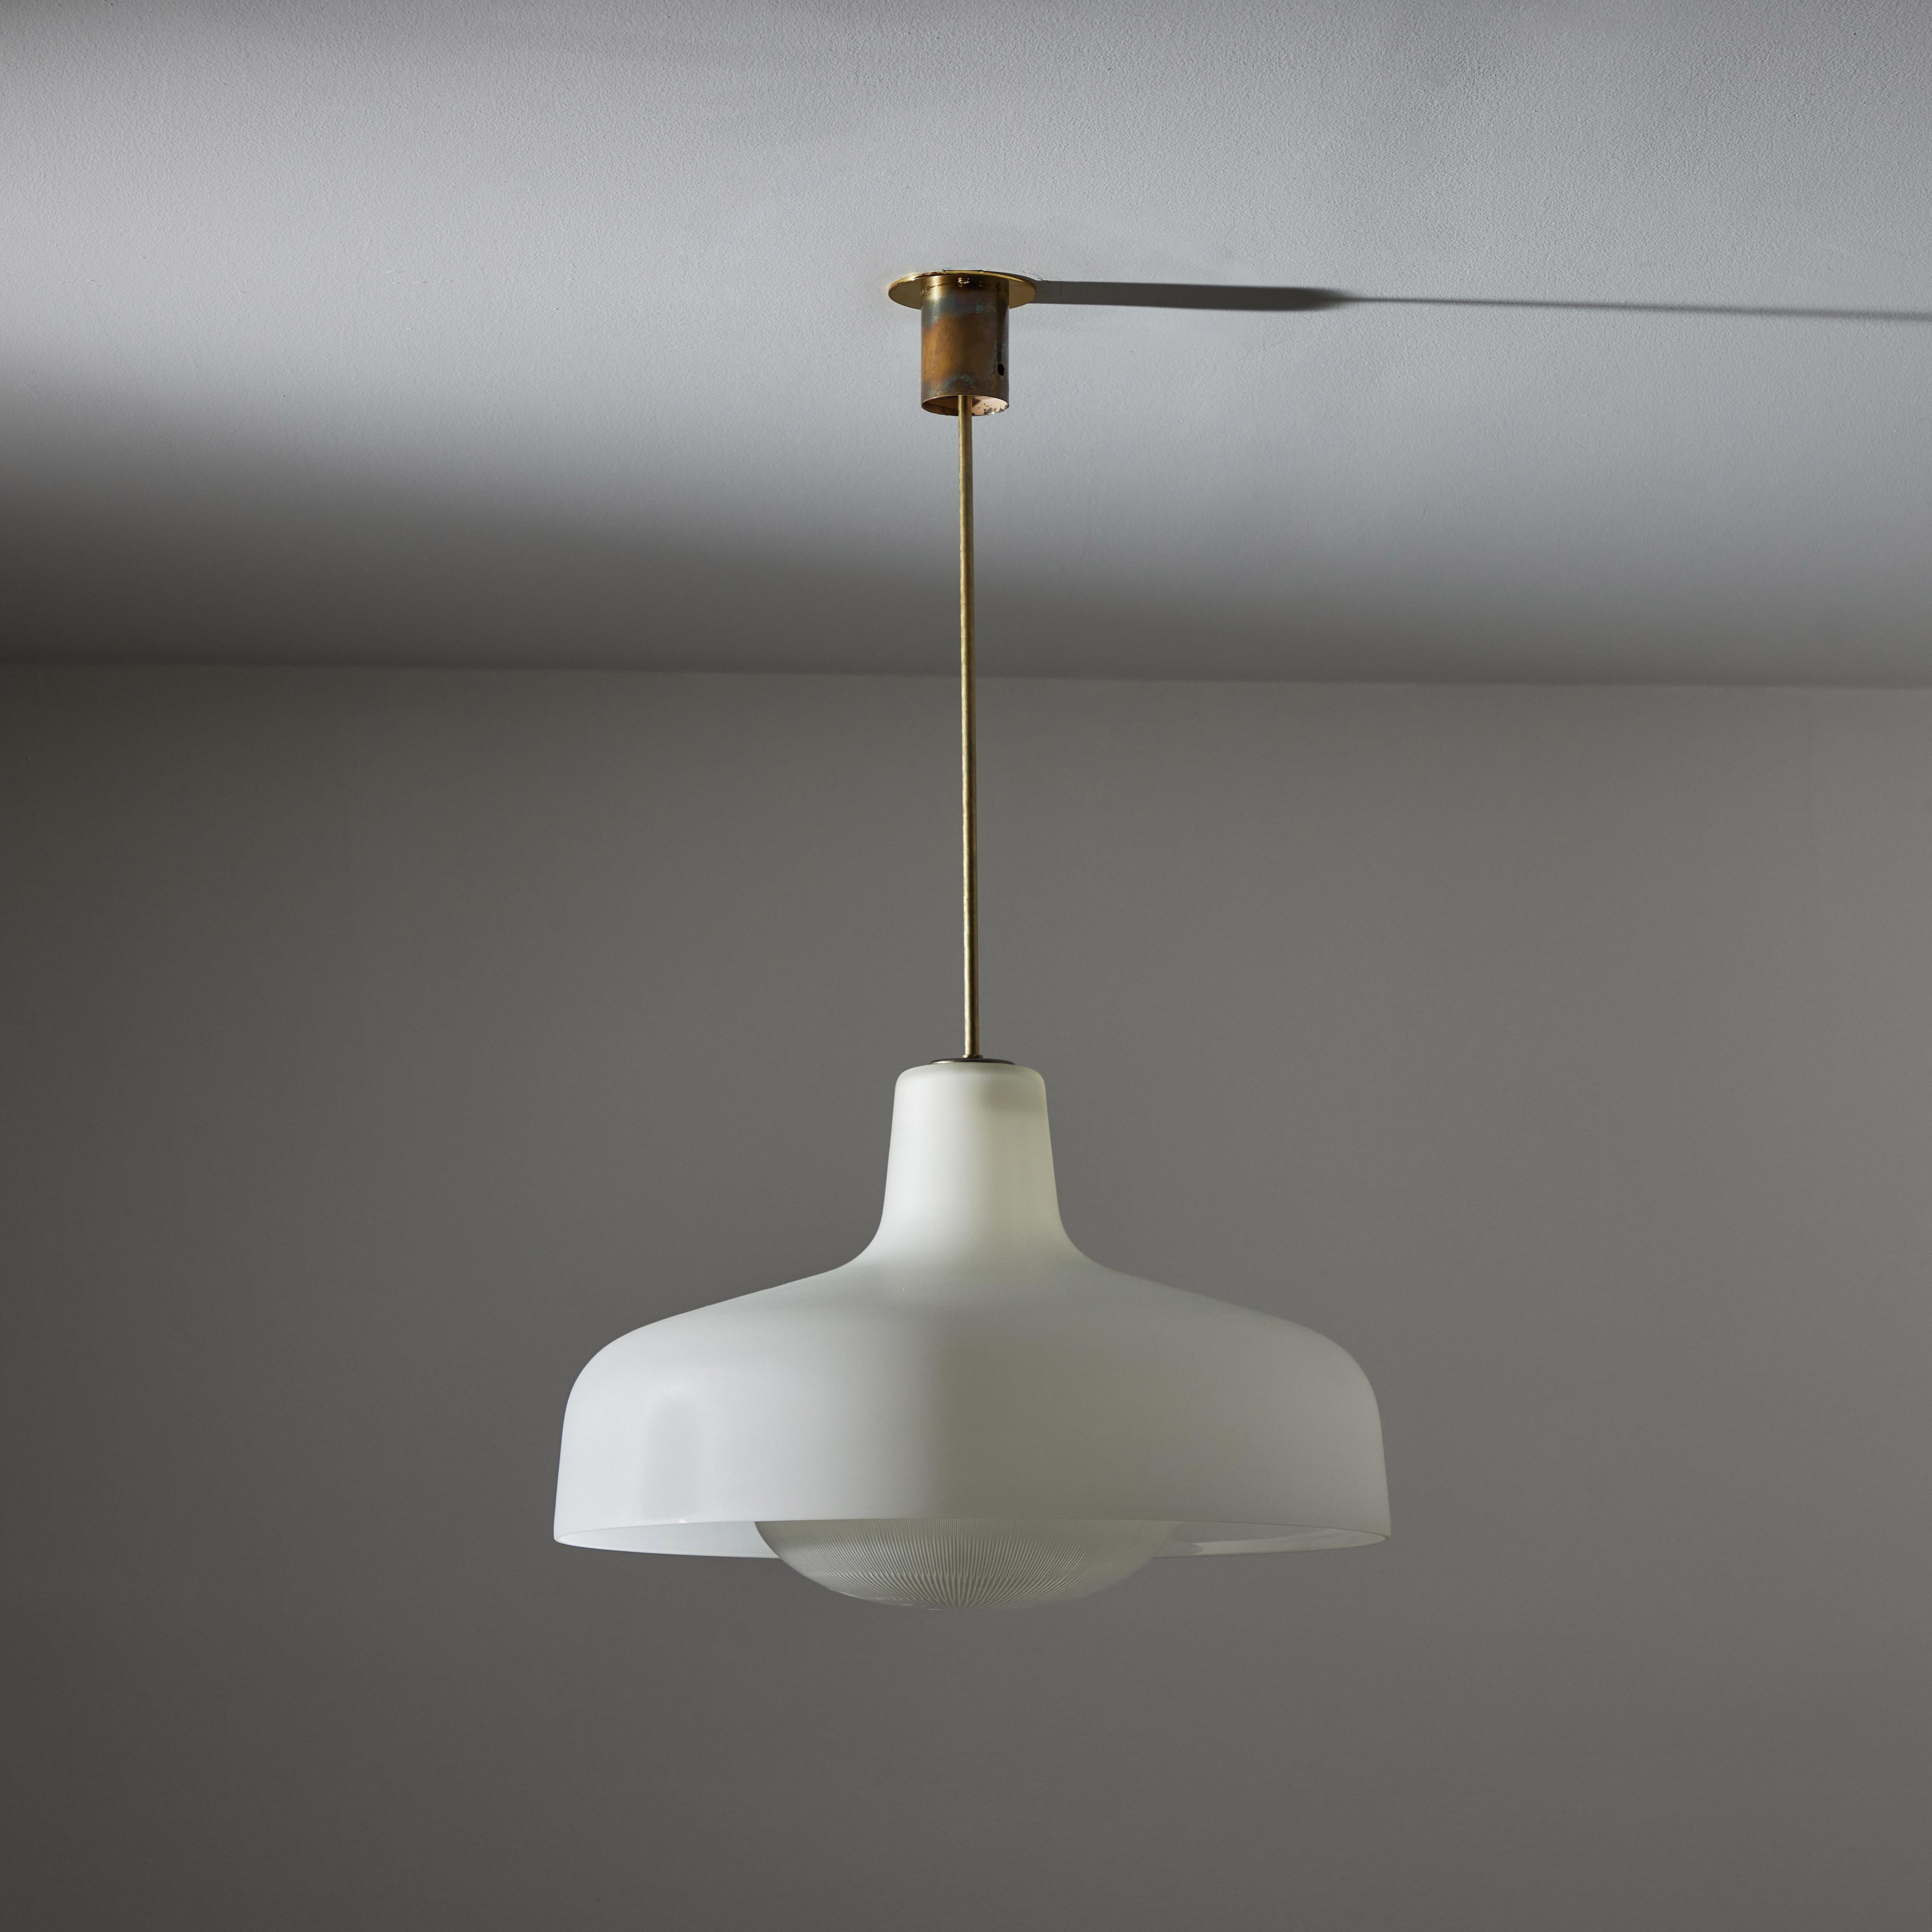 Model LS7 “Paolina” ceiling light by Ignazio Gardella for Azucena. Designed and manufactured in Italy, 1958. Exterior white glass, brass fixture stem and canopy, with reeded glass diffuser at the bottom. Original canopy, custom brass backplate. We